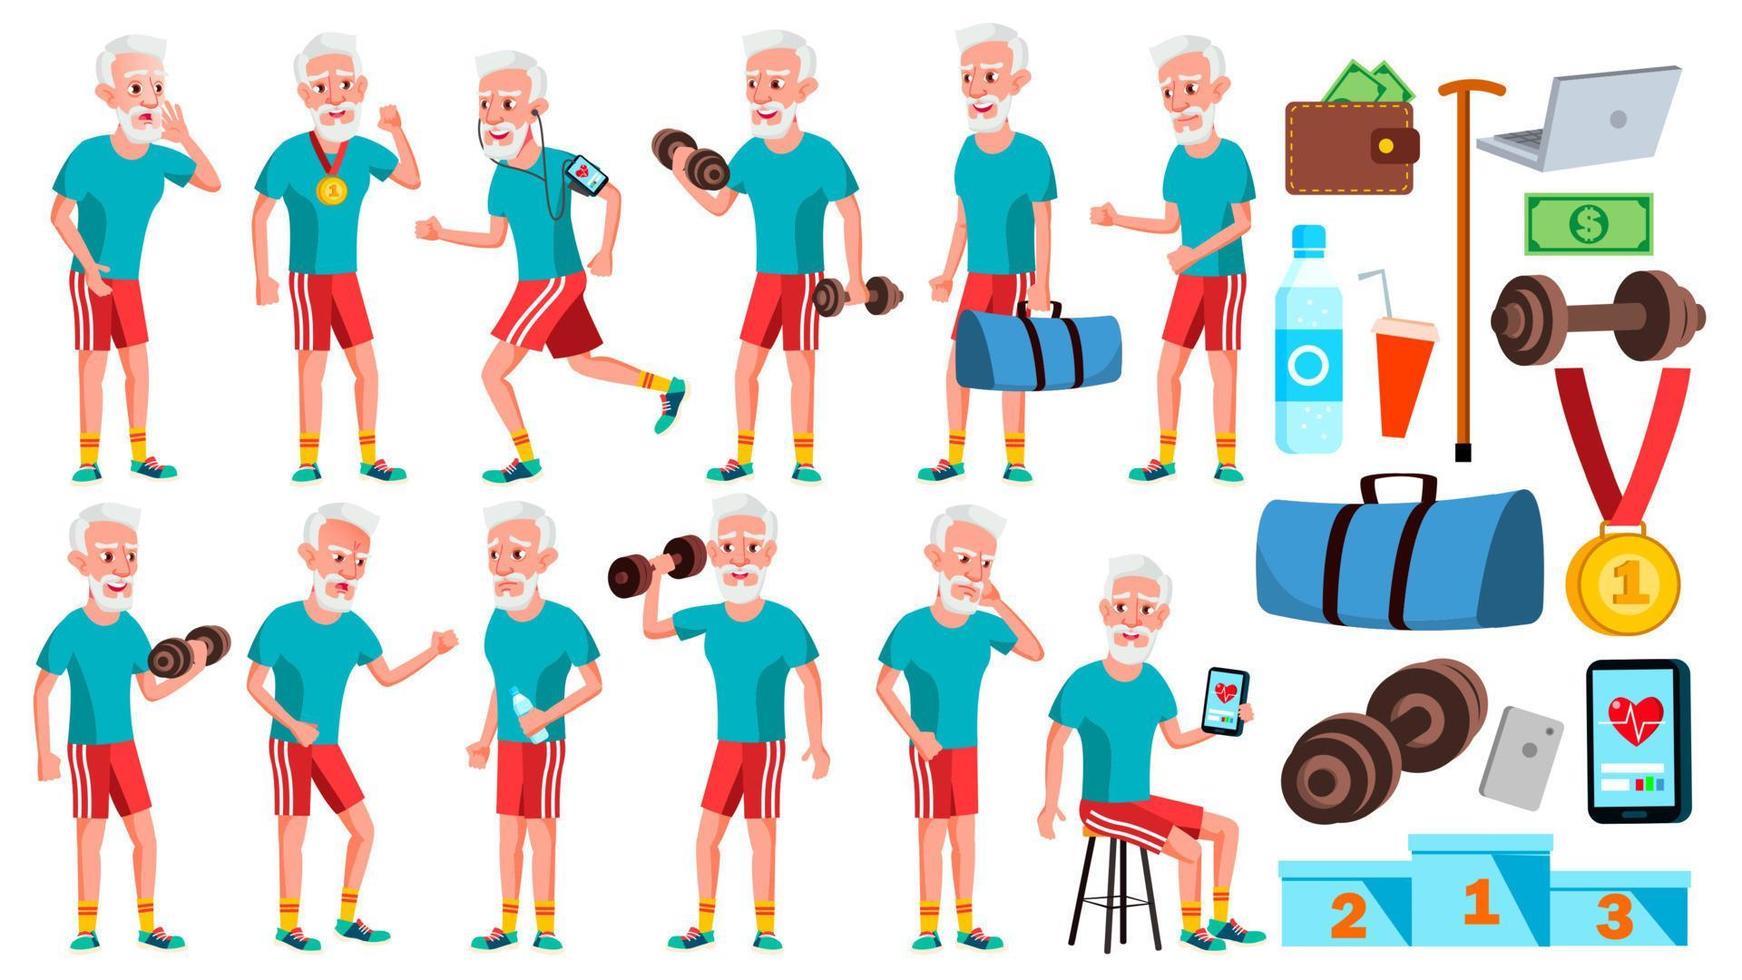 Old Man Poses Set Vector. Elderly People. Senior Person. Aged. Sport, Fitness. Comic Pensioner. Lifestyle. Postcard, Cover, Placard Design. Isolated Cartoon Illustration vector